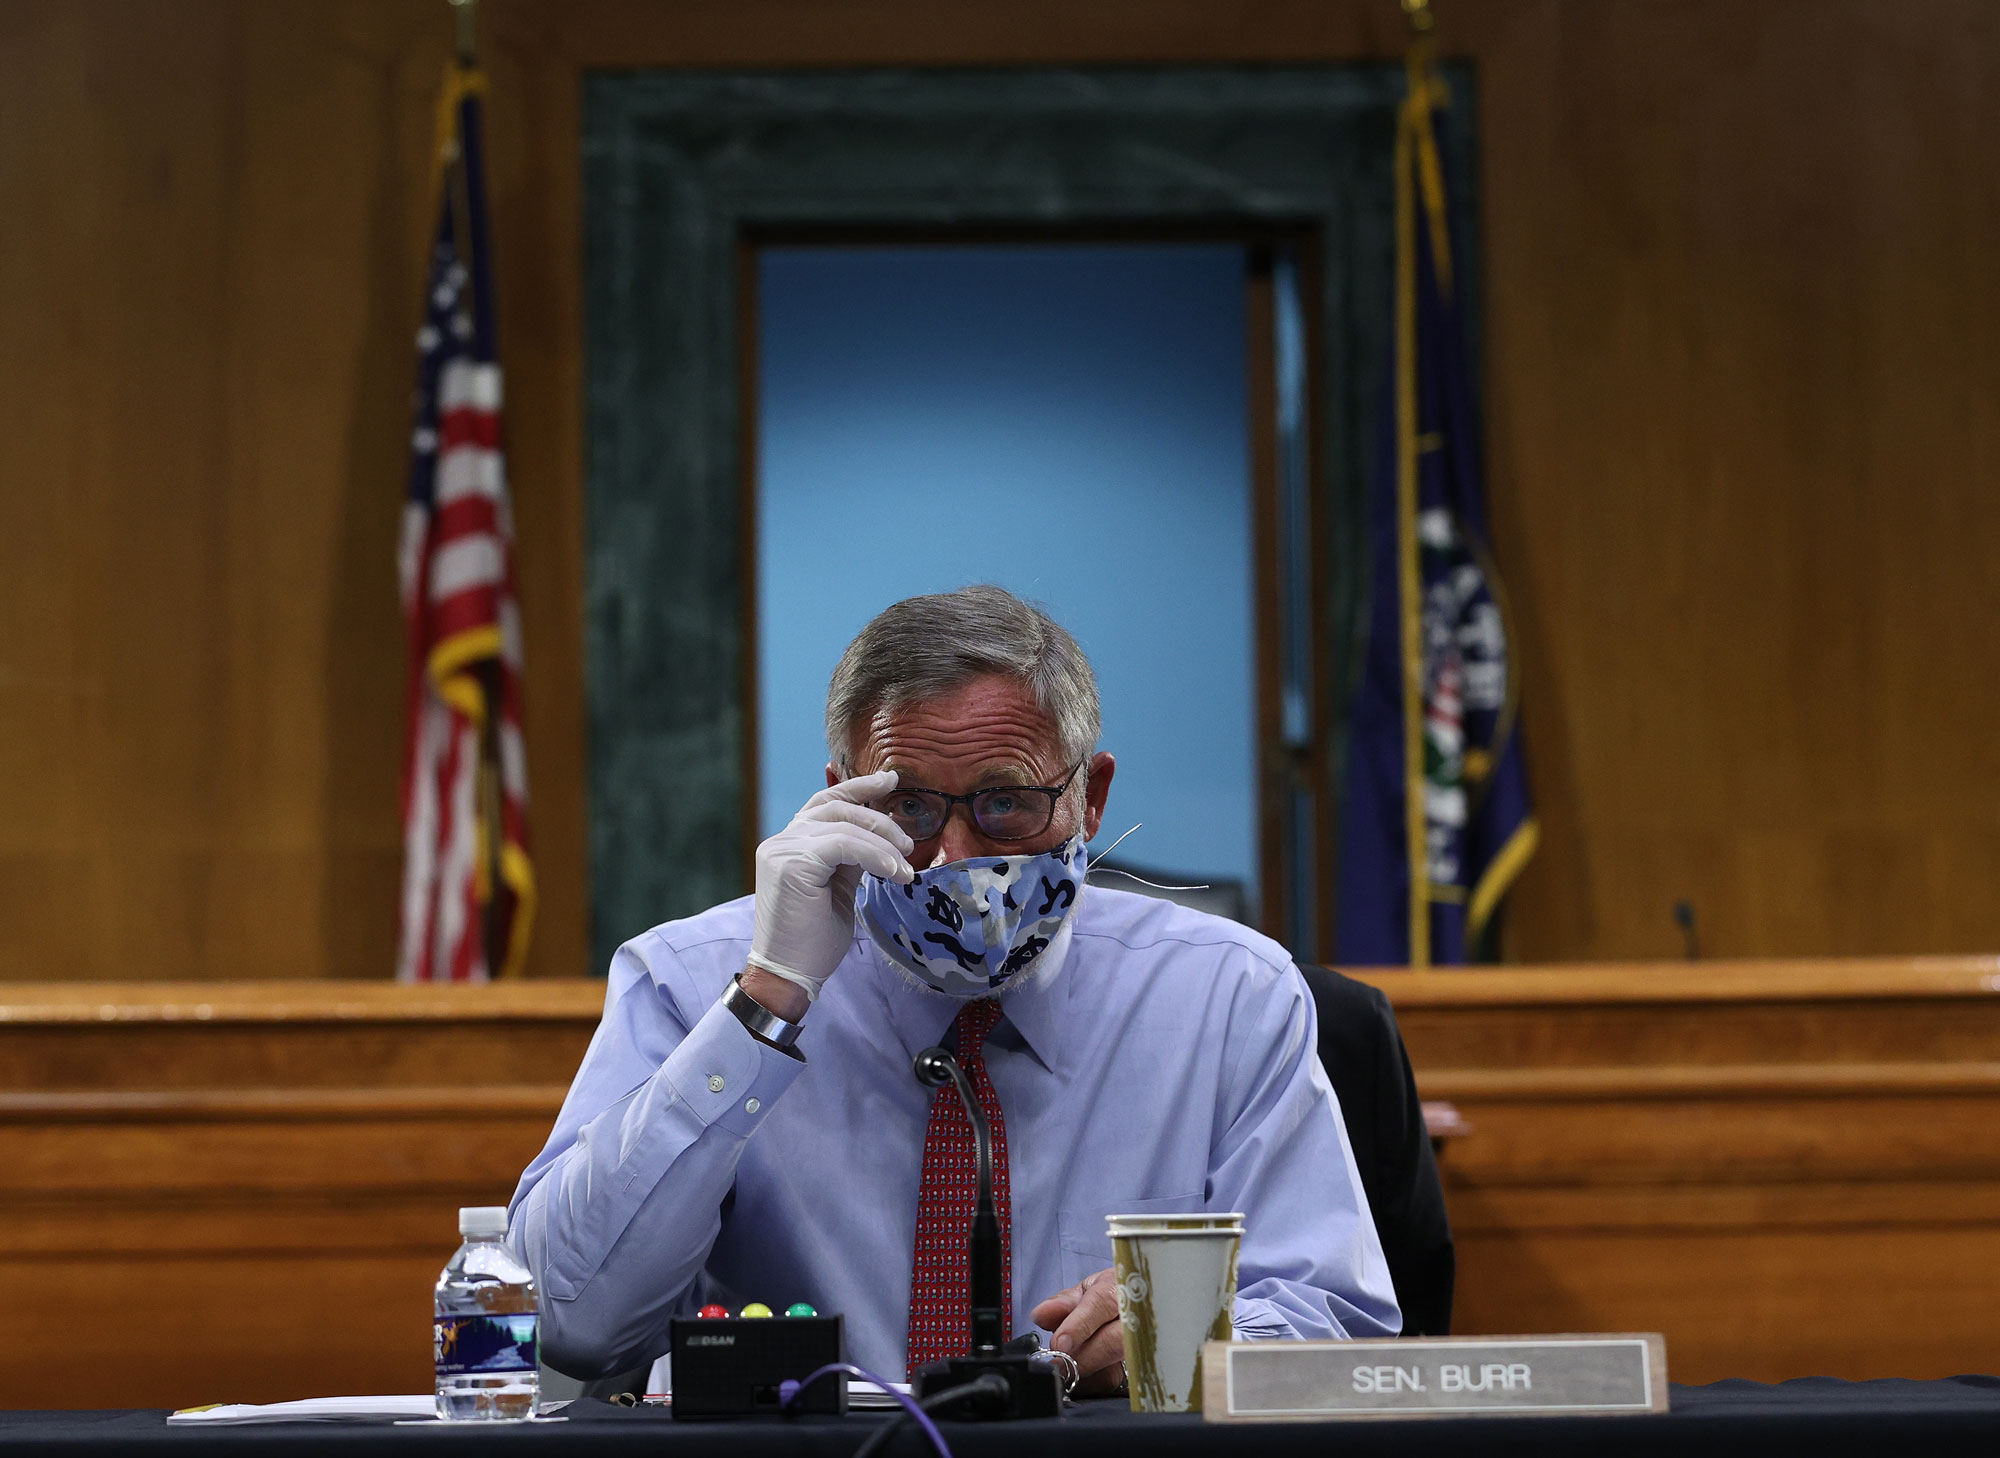 Sen. Richard Burr (R-NC) attends a Senate Health, Education, Labor and Pensions Committee hearing on Capitol Hill on May 12 in Washington.